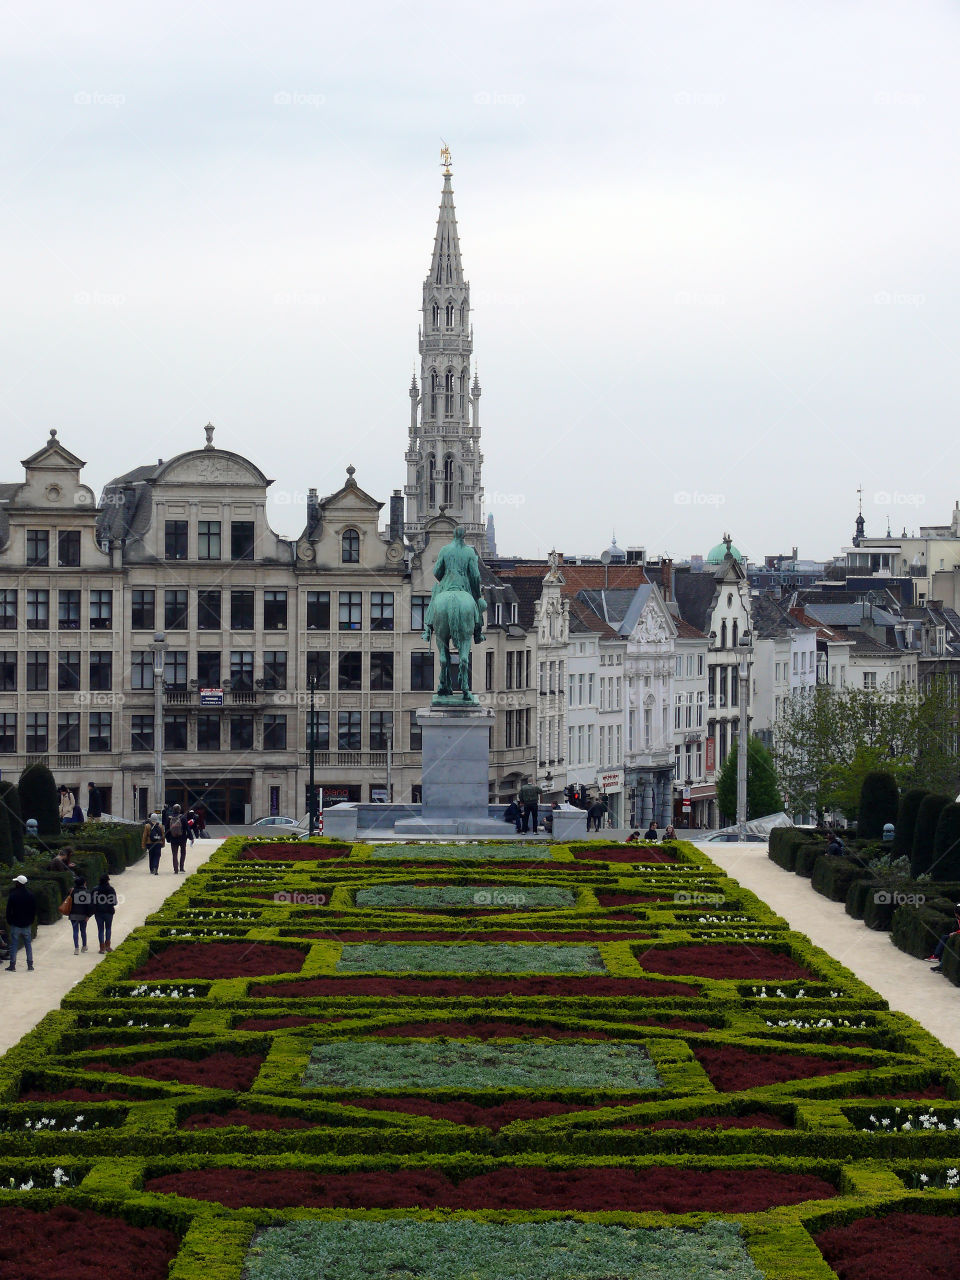 Beautifully arranged landscaping in Brussels, Belgium with Old Town in background.